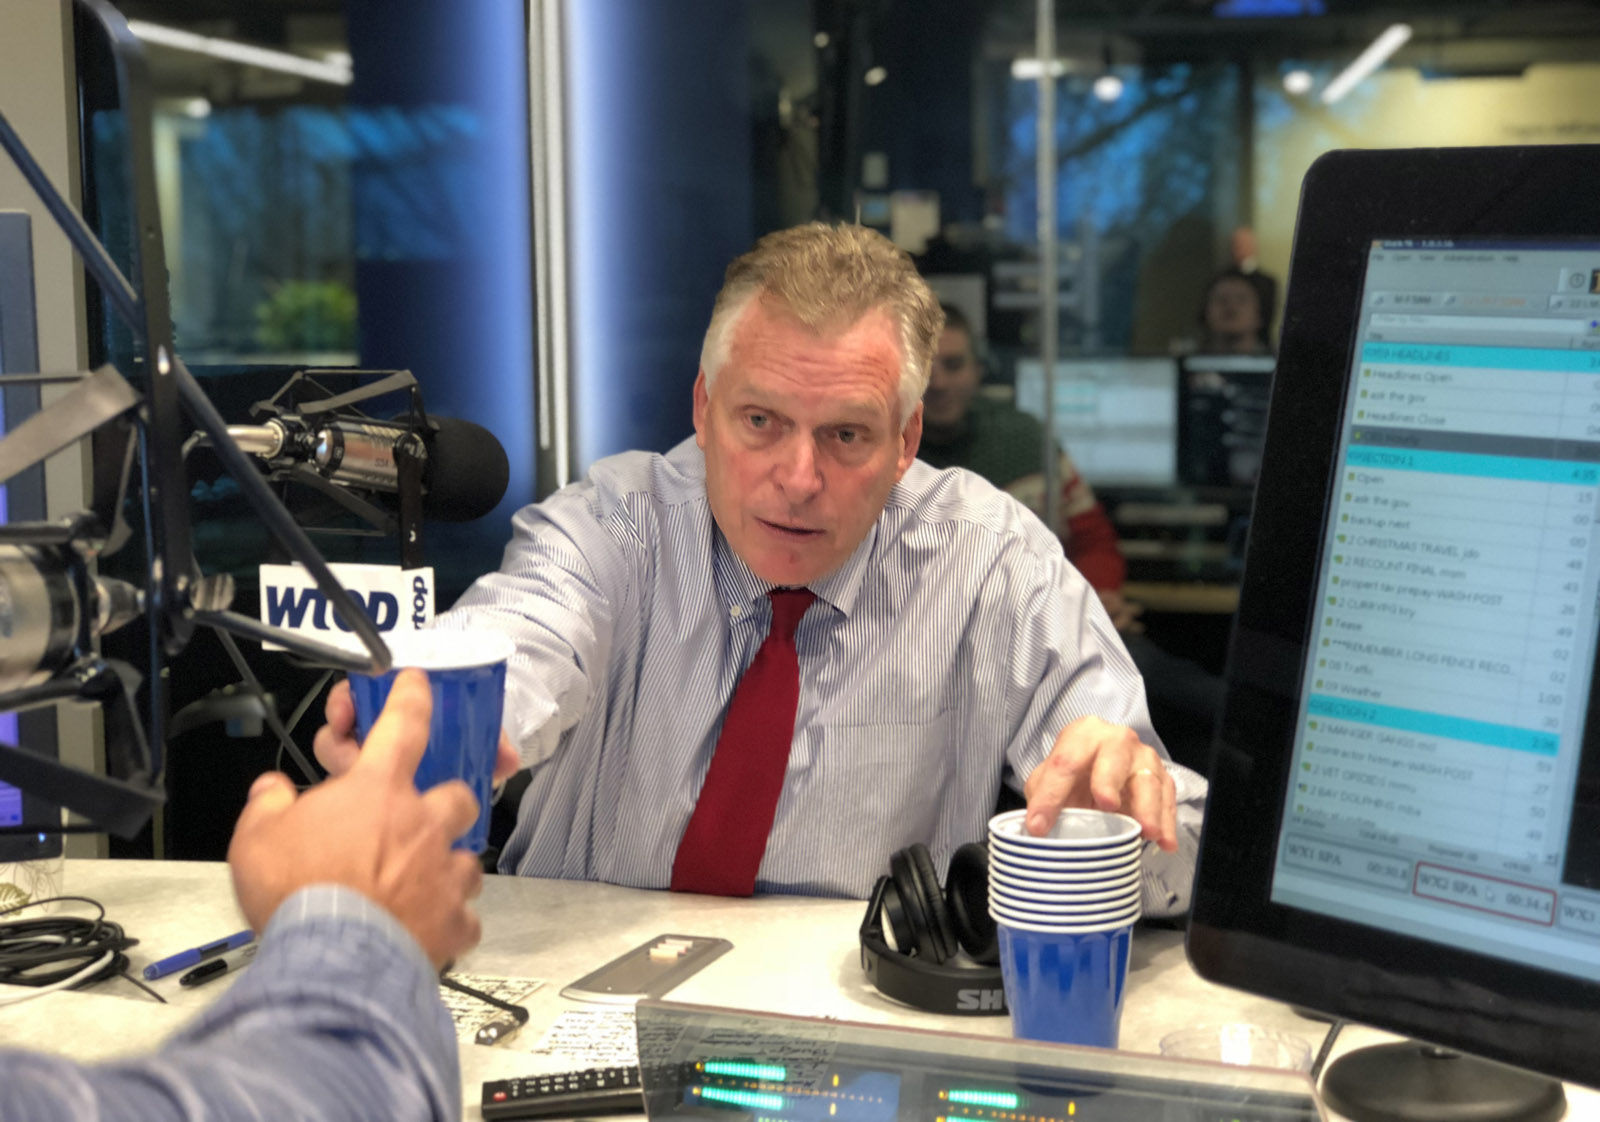 Virginia Gov. Terry McAuliffe hands a cup with stout to WTOP anchor Mark Lewis during "Ask the Governor" on Friday, Dec. 22, 2017. (WTOP/Omama Altaleb)